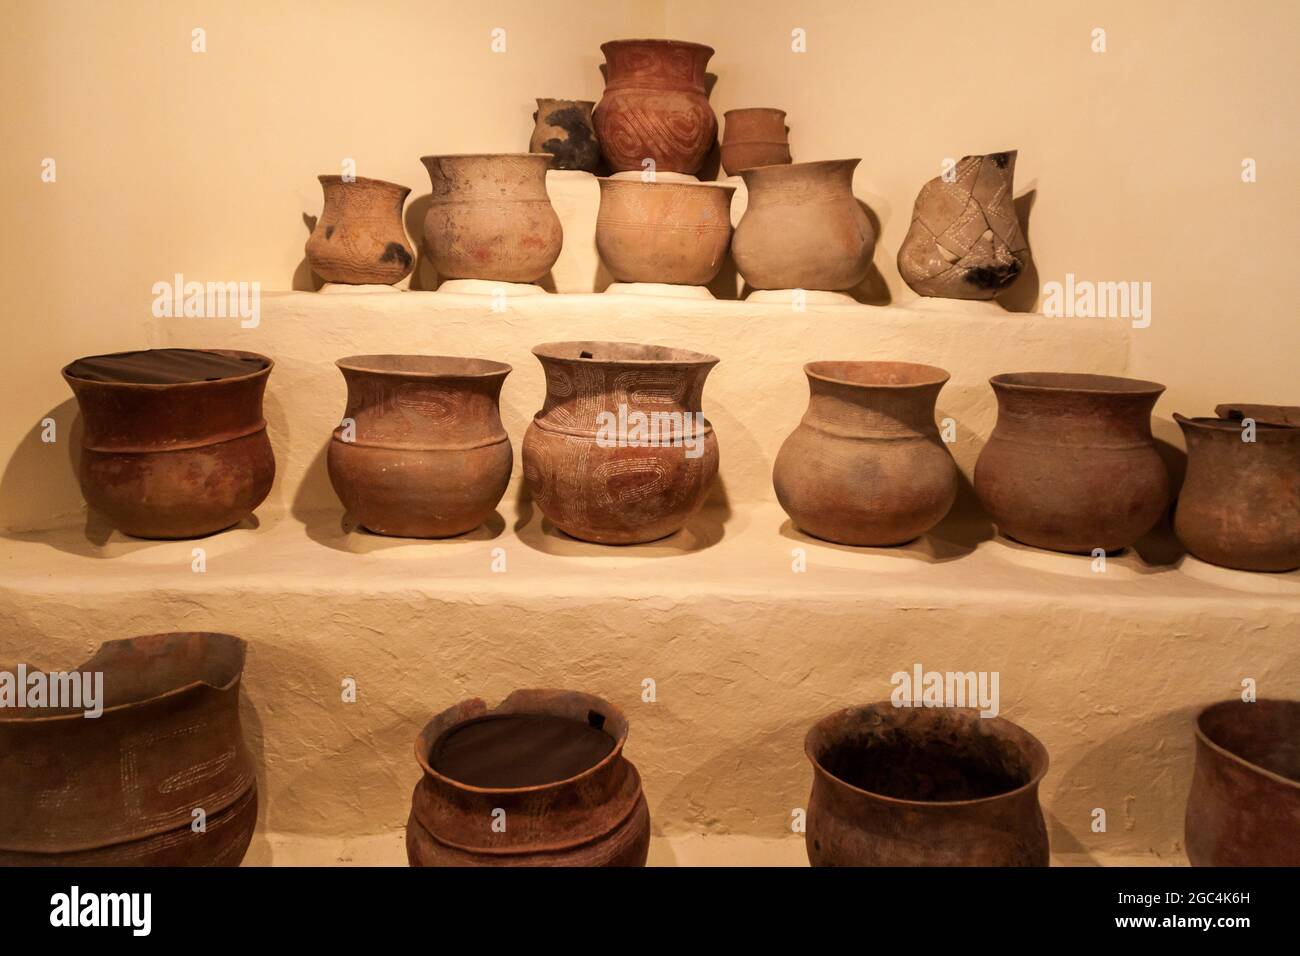 TIERRADENTRO, COLOMBIA - SEPTEMBER 12, 2015: Bowls located in archeological museum in Tierradentro, Colombia. Stock Photo